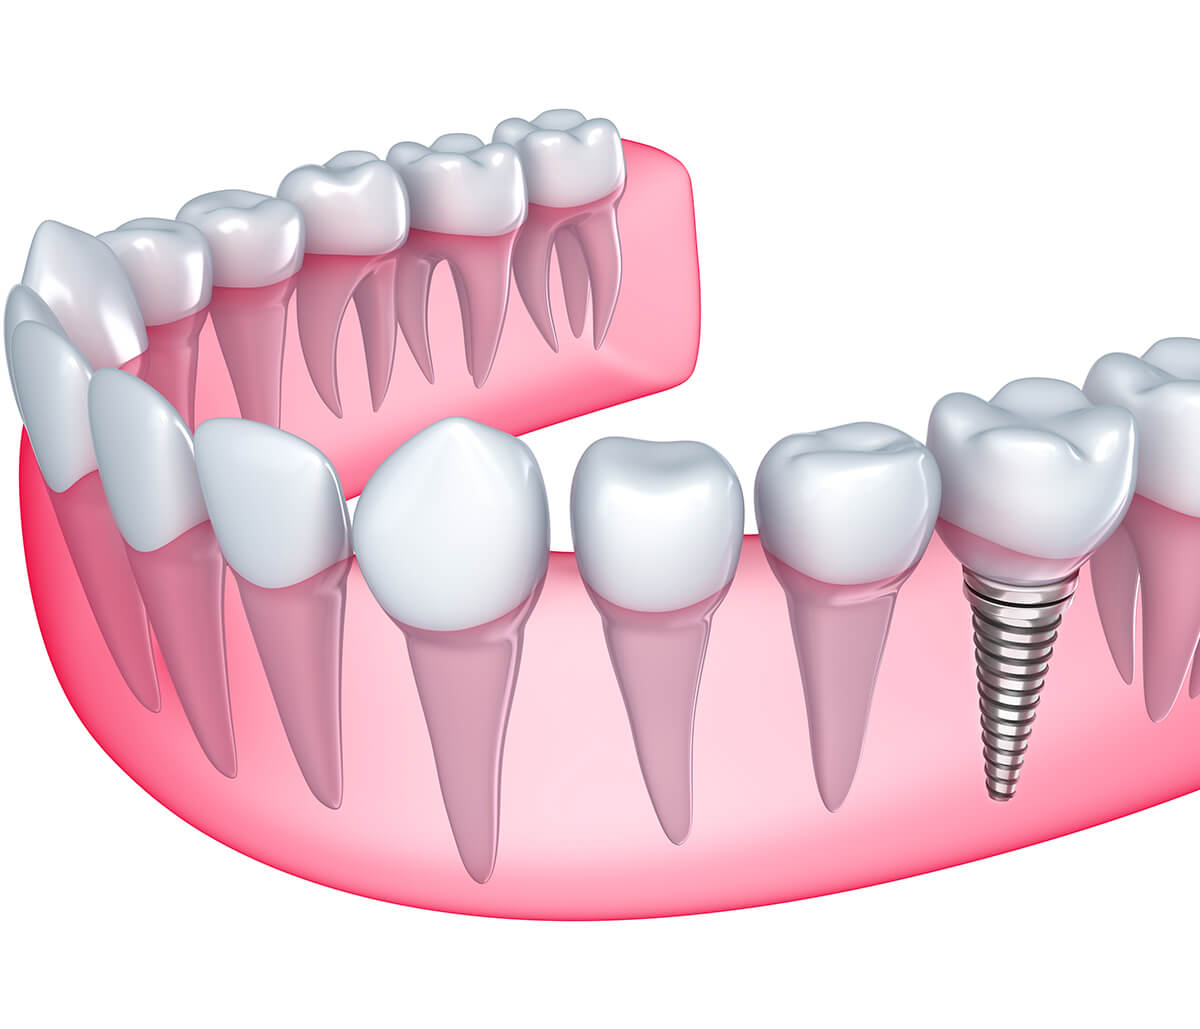 Why You Should Consider Dental Implants for Missing Teeth in Lakewood, CO Area